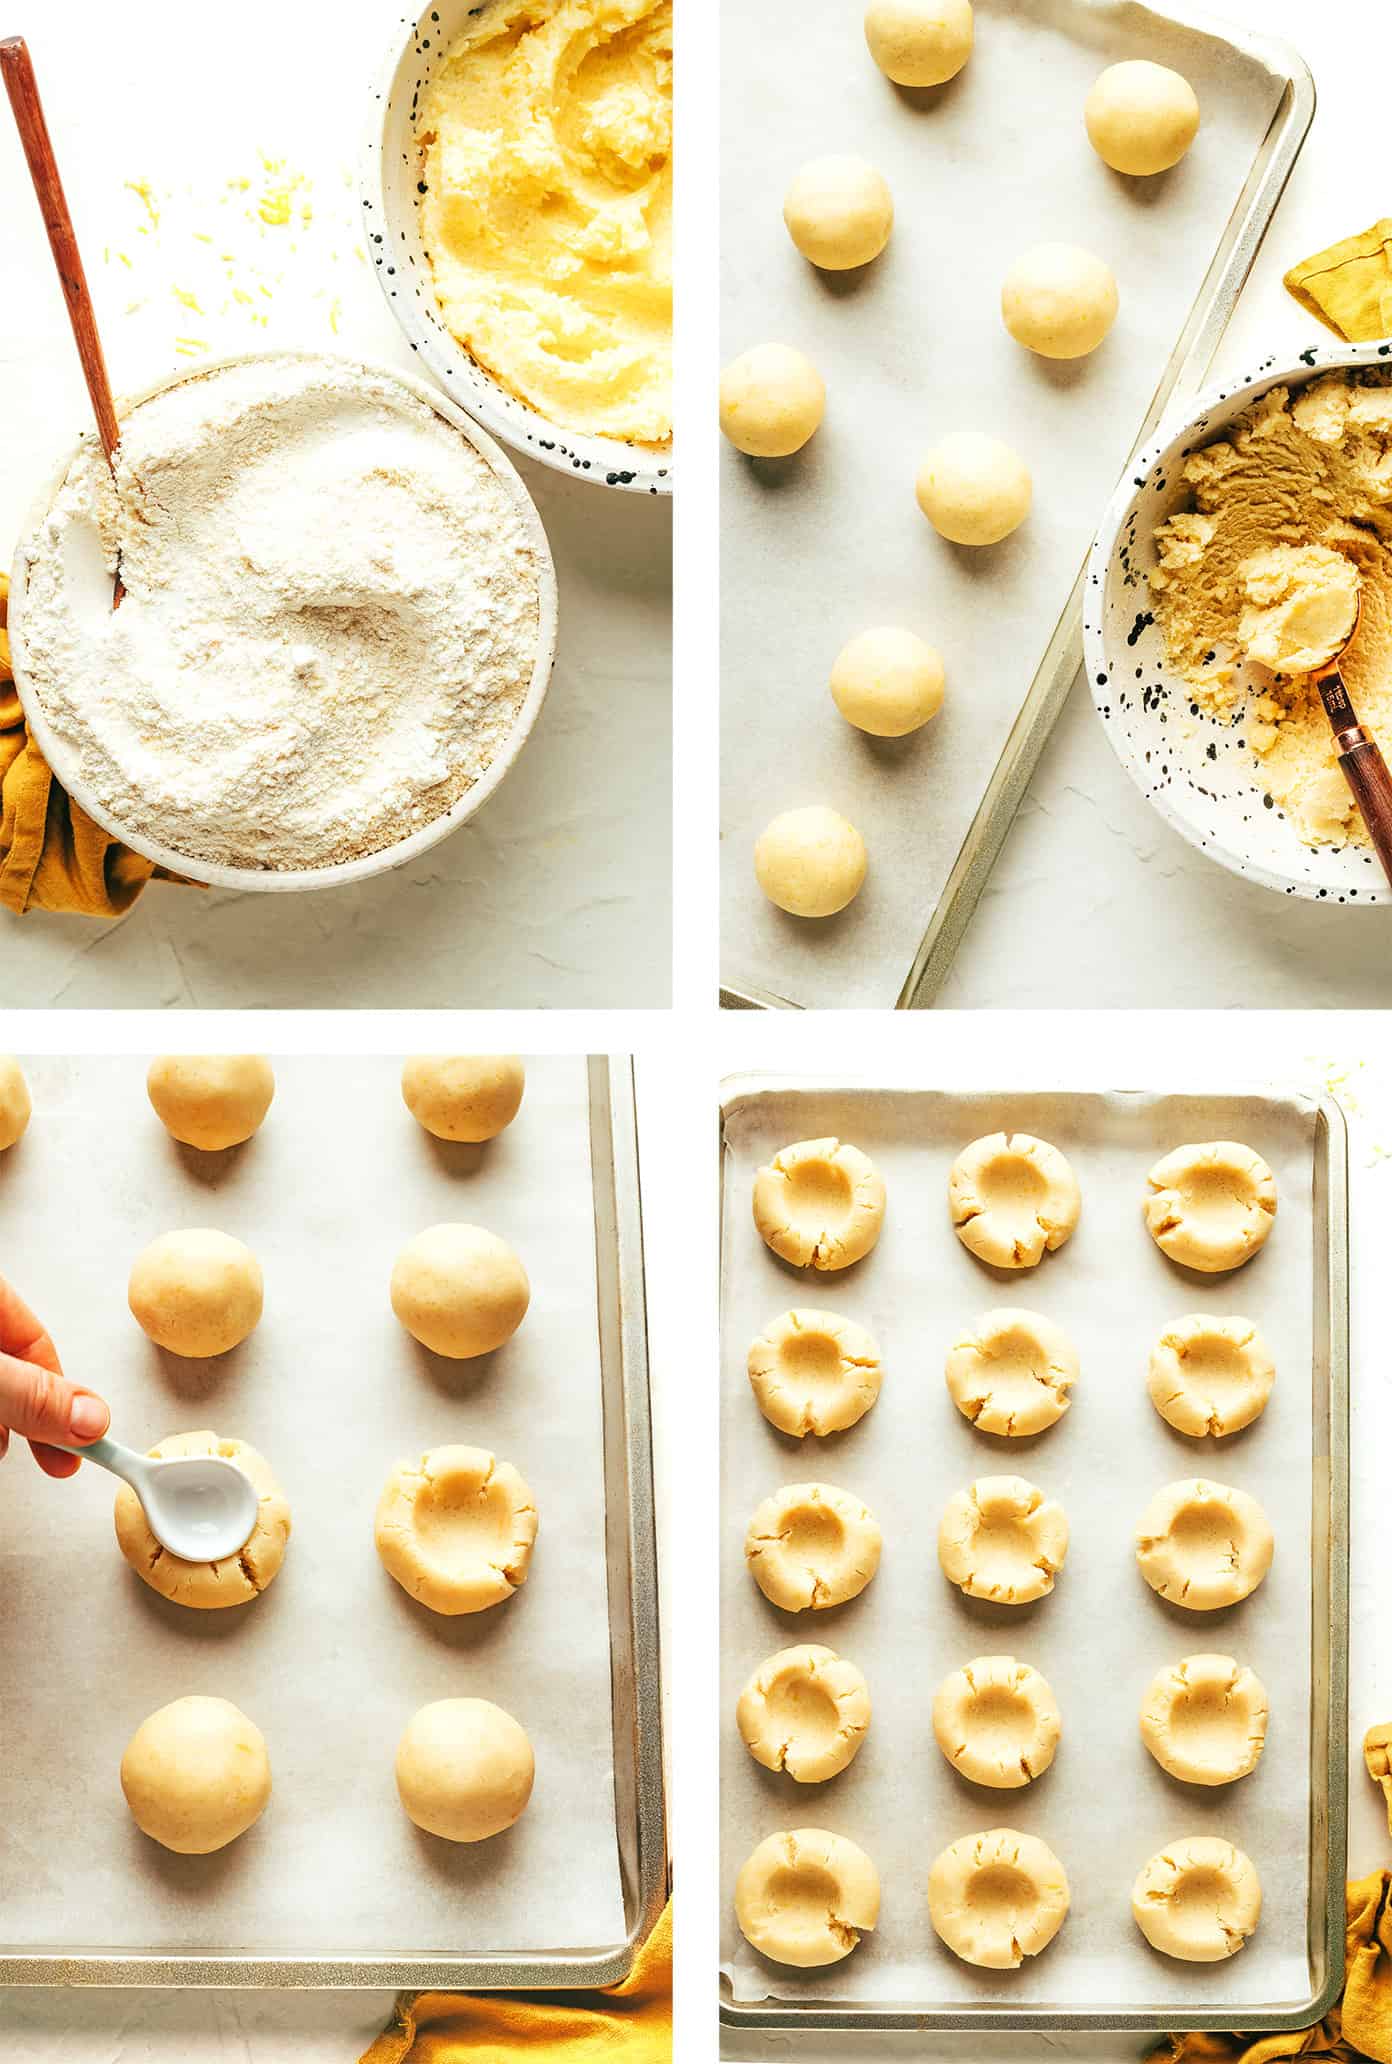 Step by step photos showing how to make thumbprint cookies